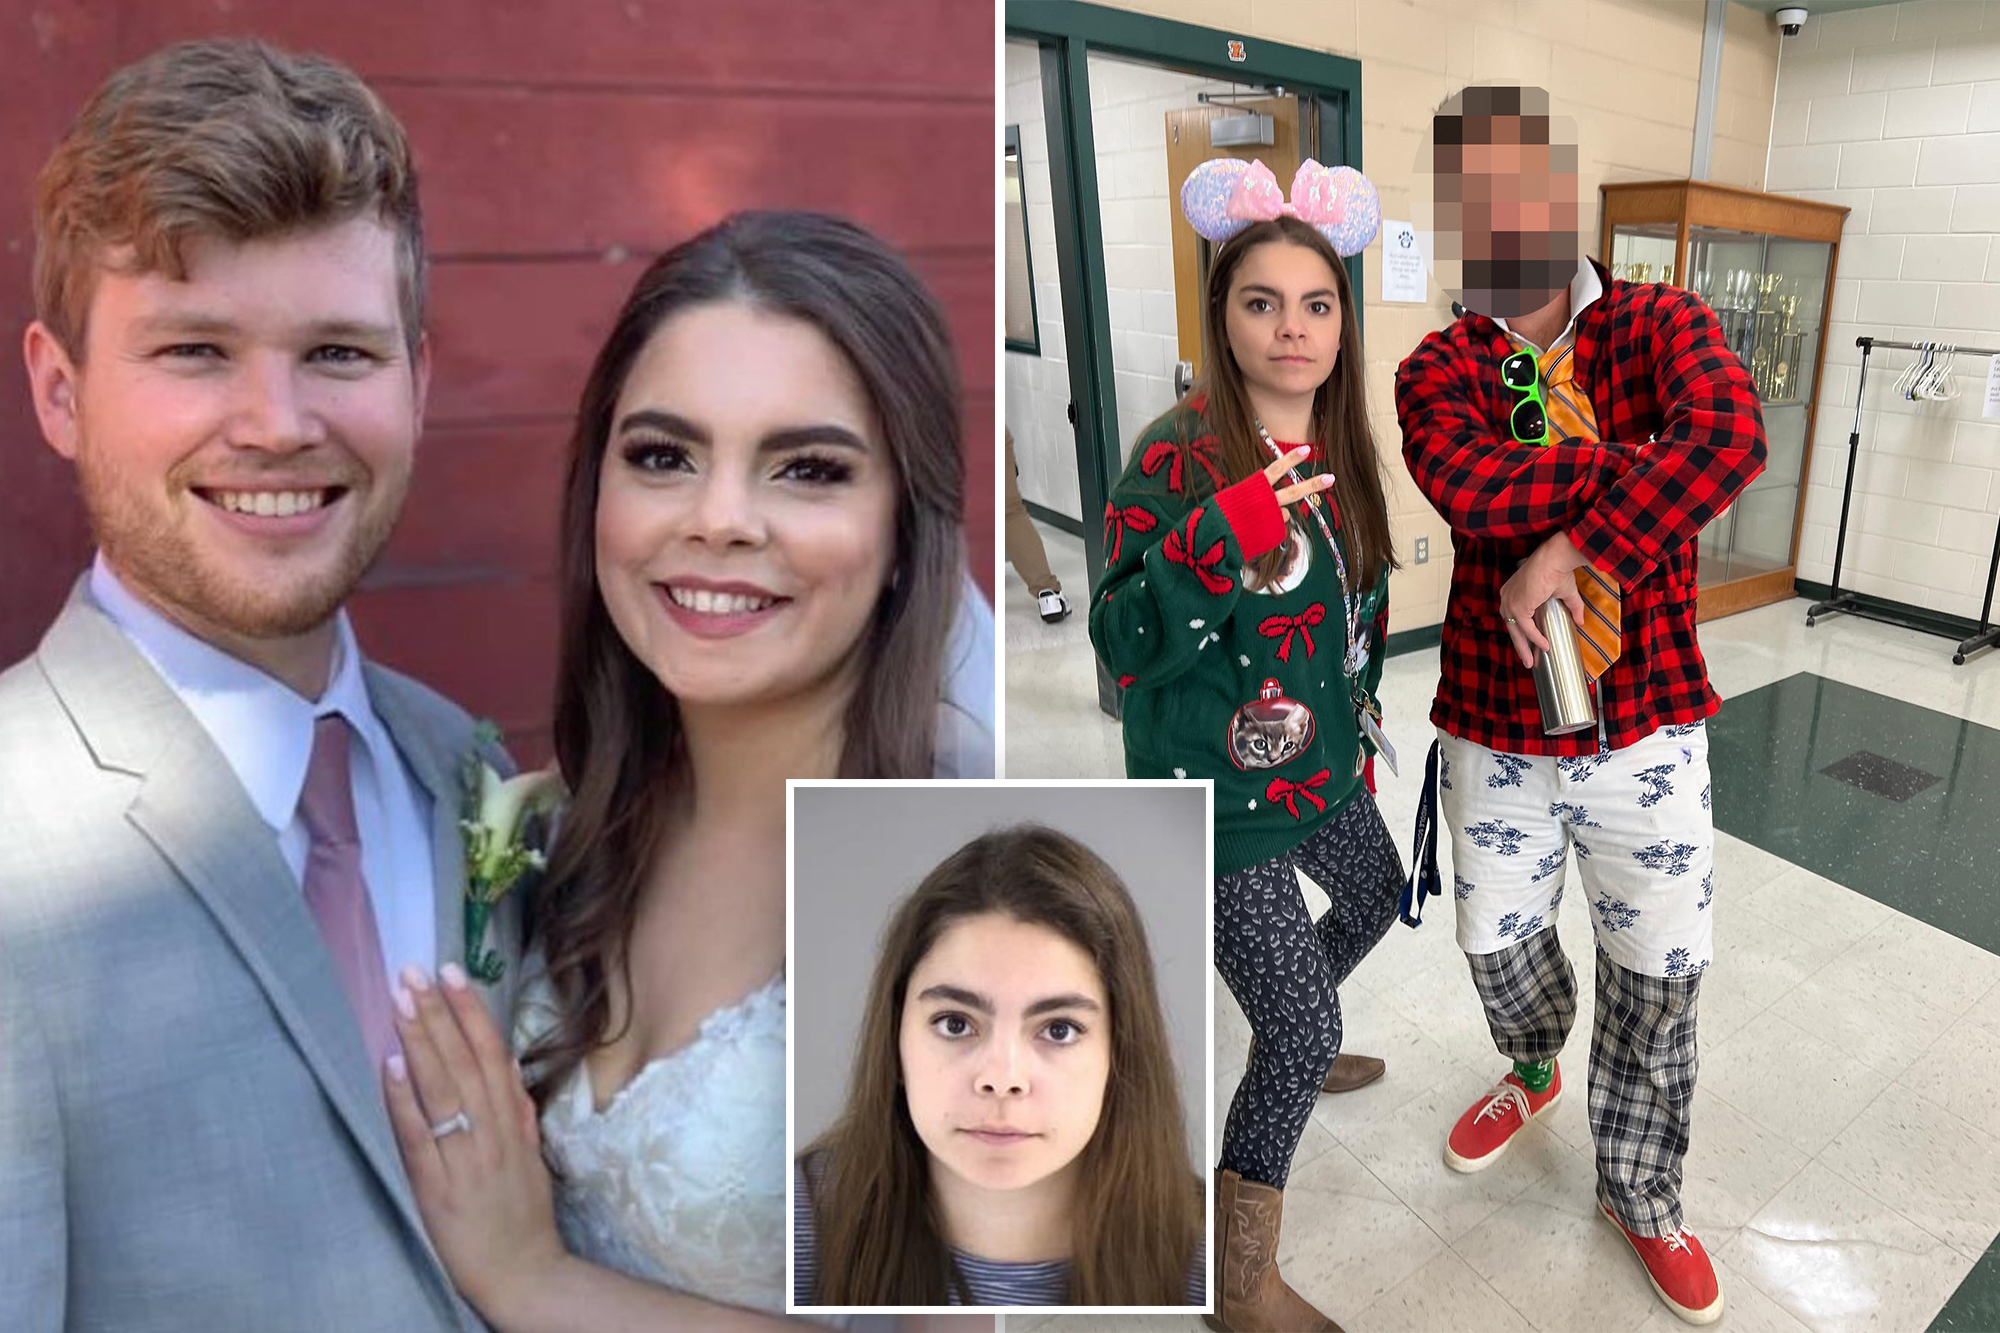 Megan Pauline Jordan pictured on the left on her wedding day, inset in her mugshot and right with an unidentified former coworker.